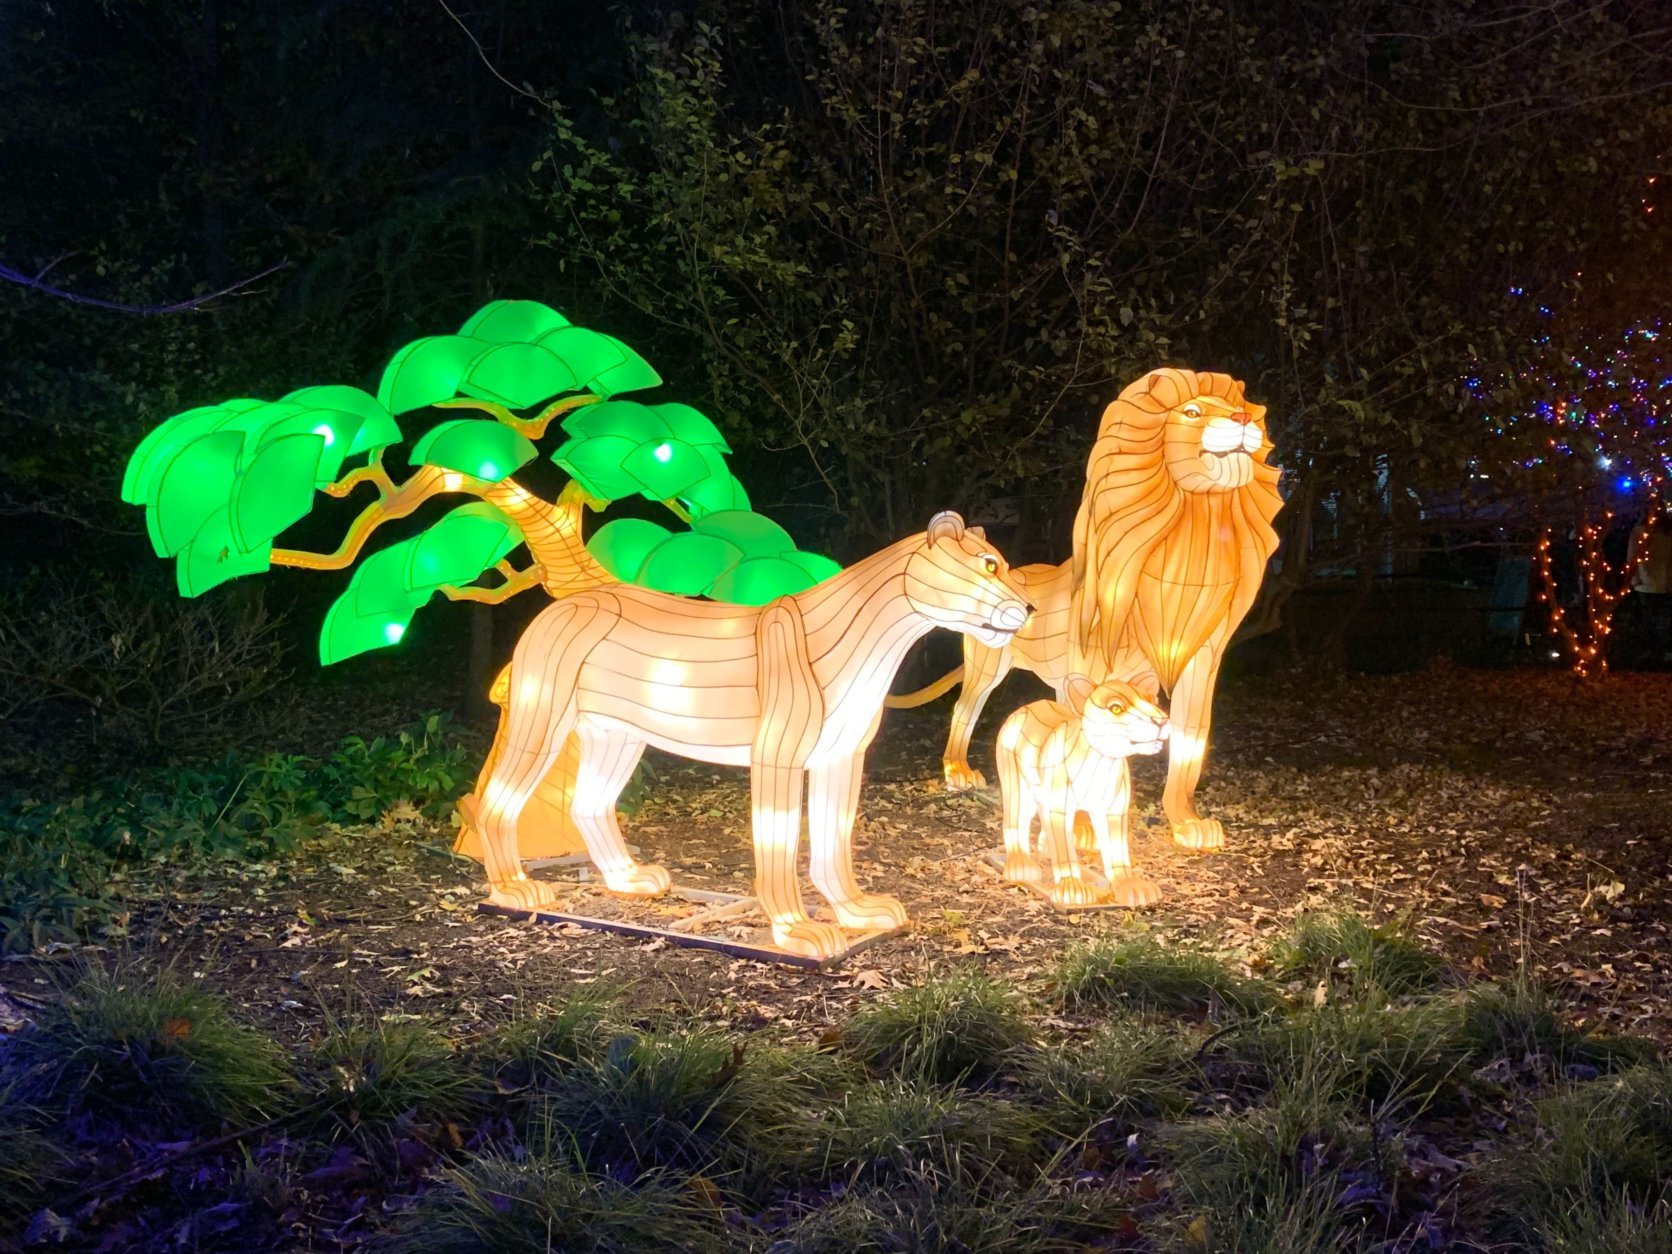 ZooLights returns to the National Zoo from Nov. 29 until Jan. 1.  